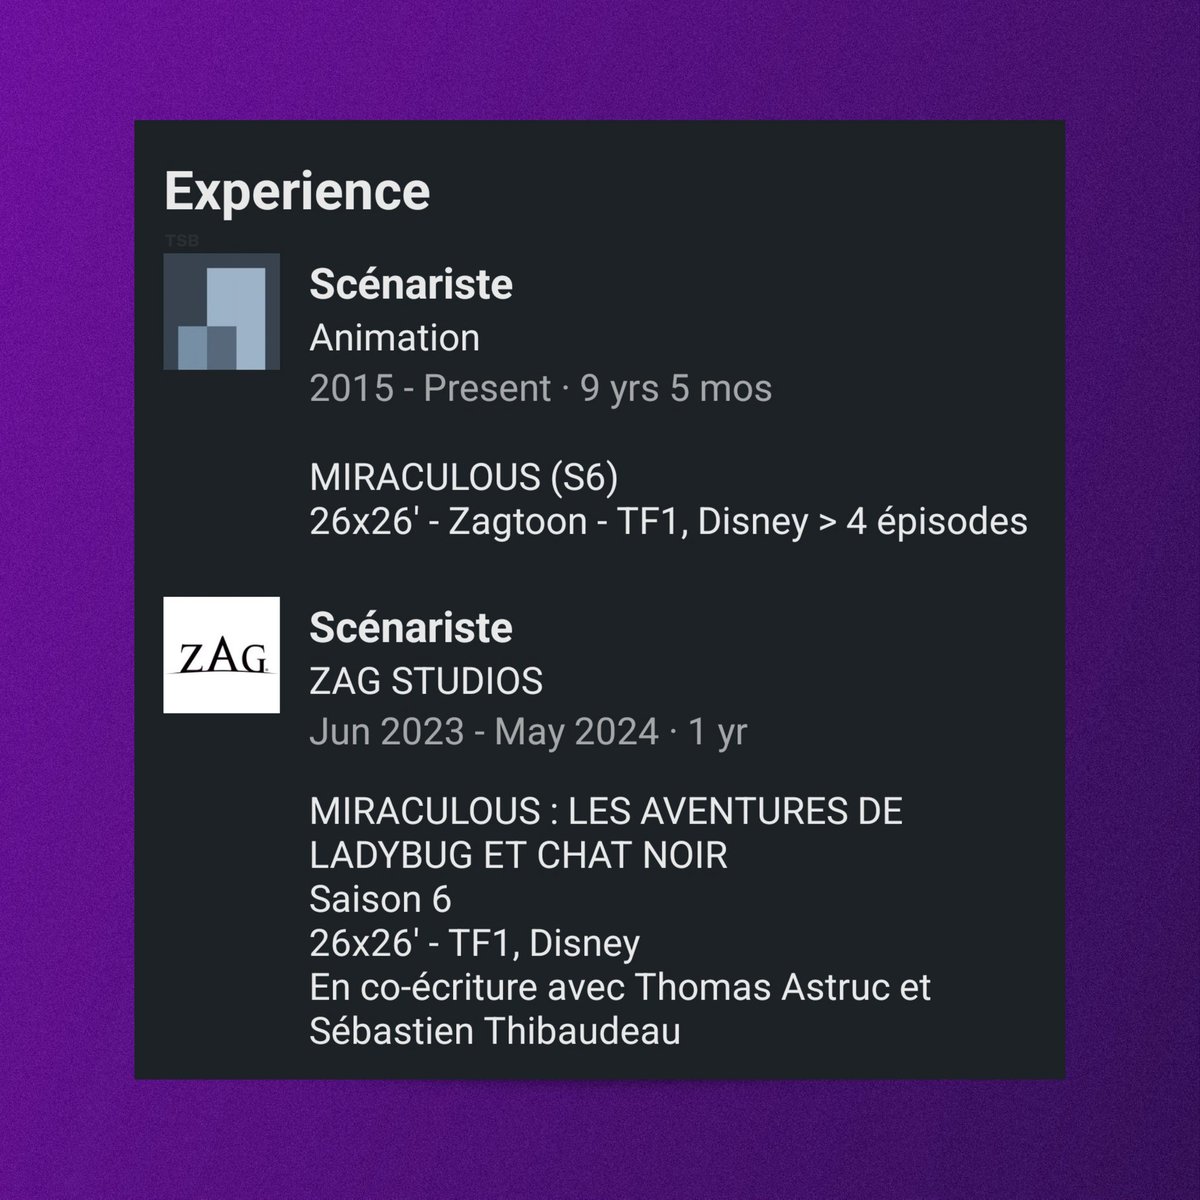 Manuel Meyre (new scriptwriter of ‘Miraculous’) wrote four episodes for Season 6, LinkedIn reveals. — His involvement began in June 2023 and culminated on May 2024.